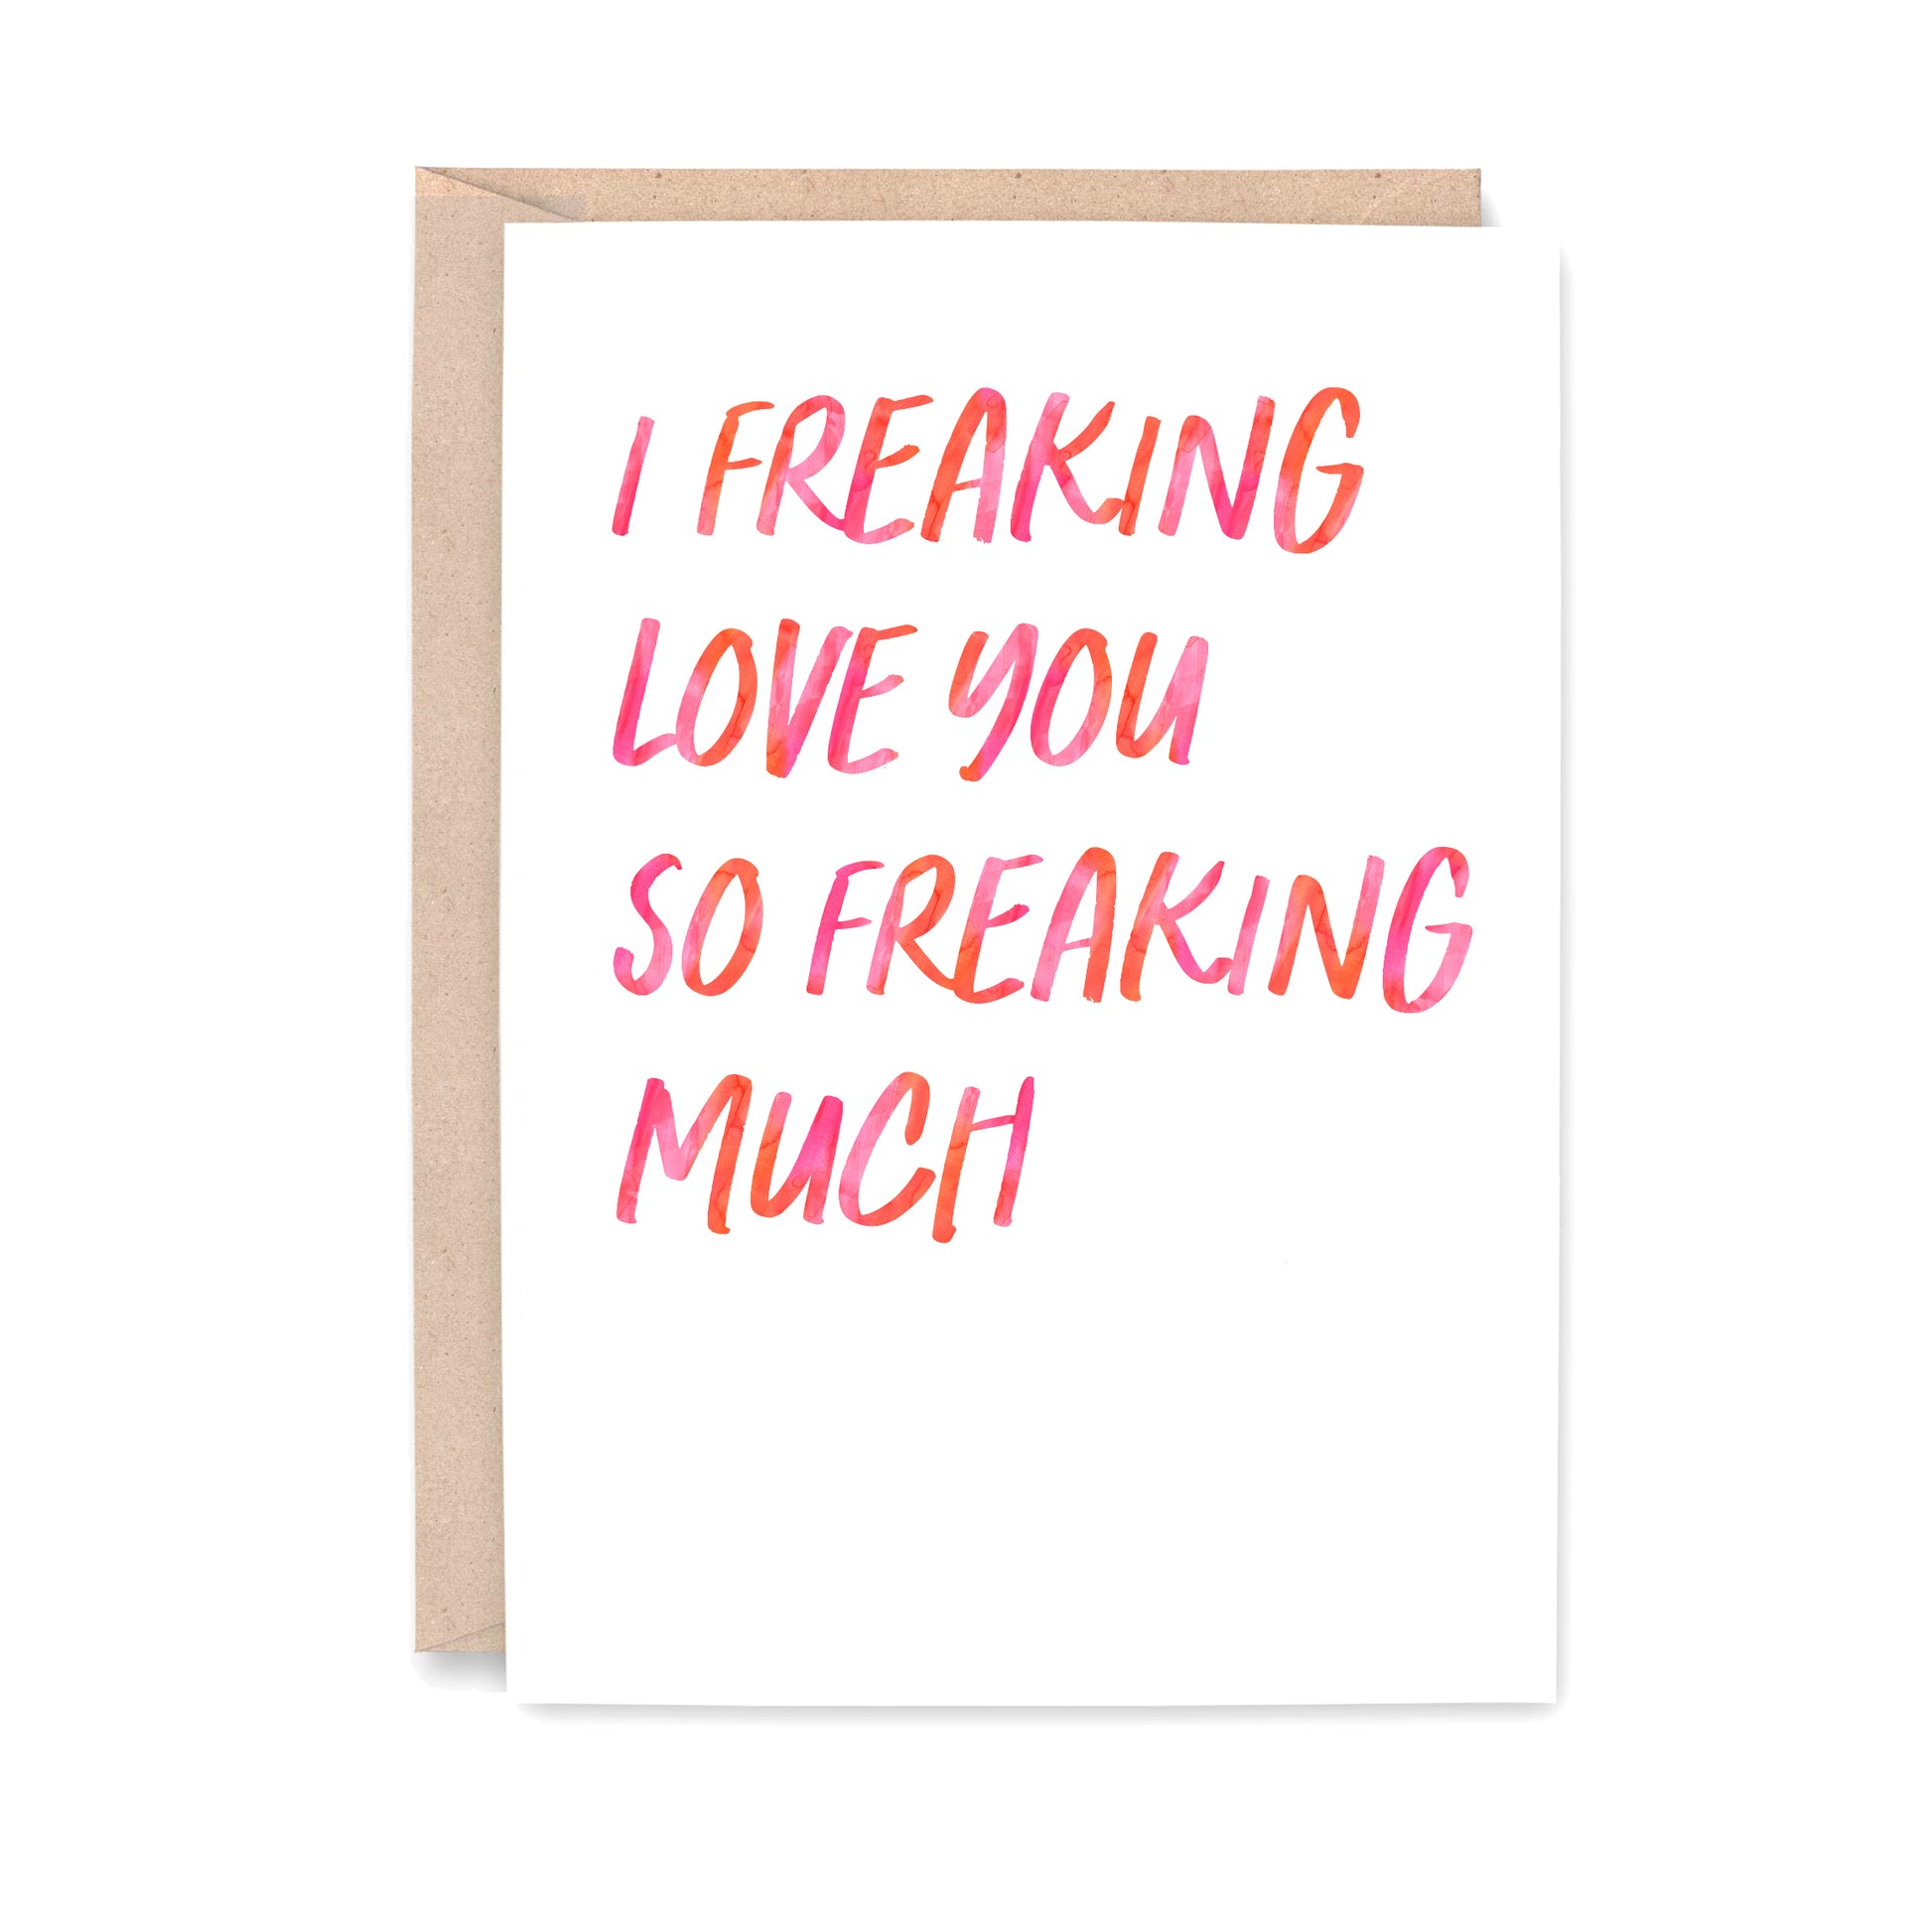 Greeting card that says "I freaking love you so freaking much"